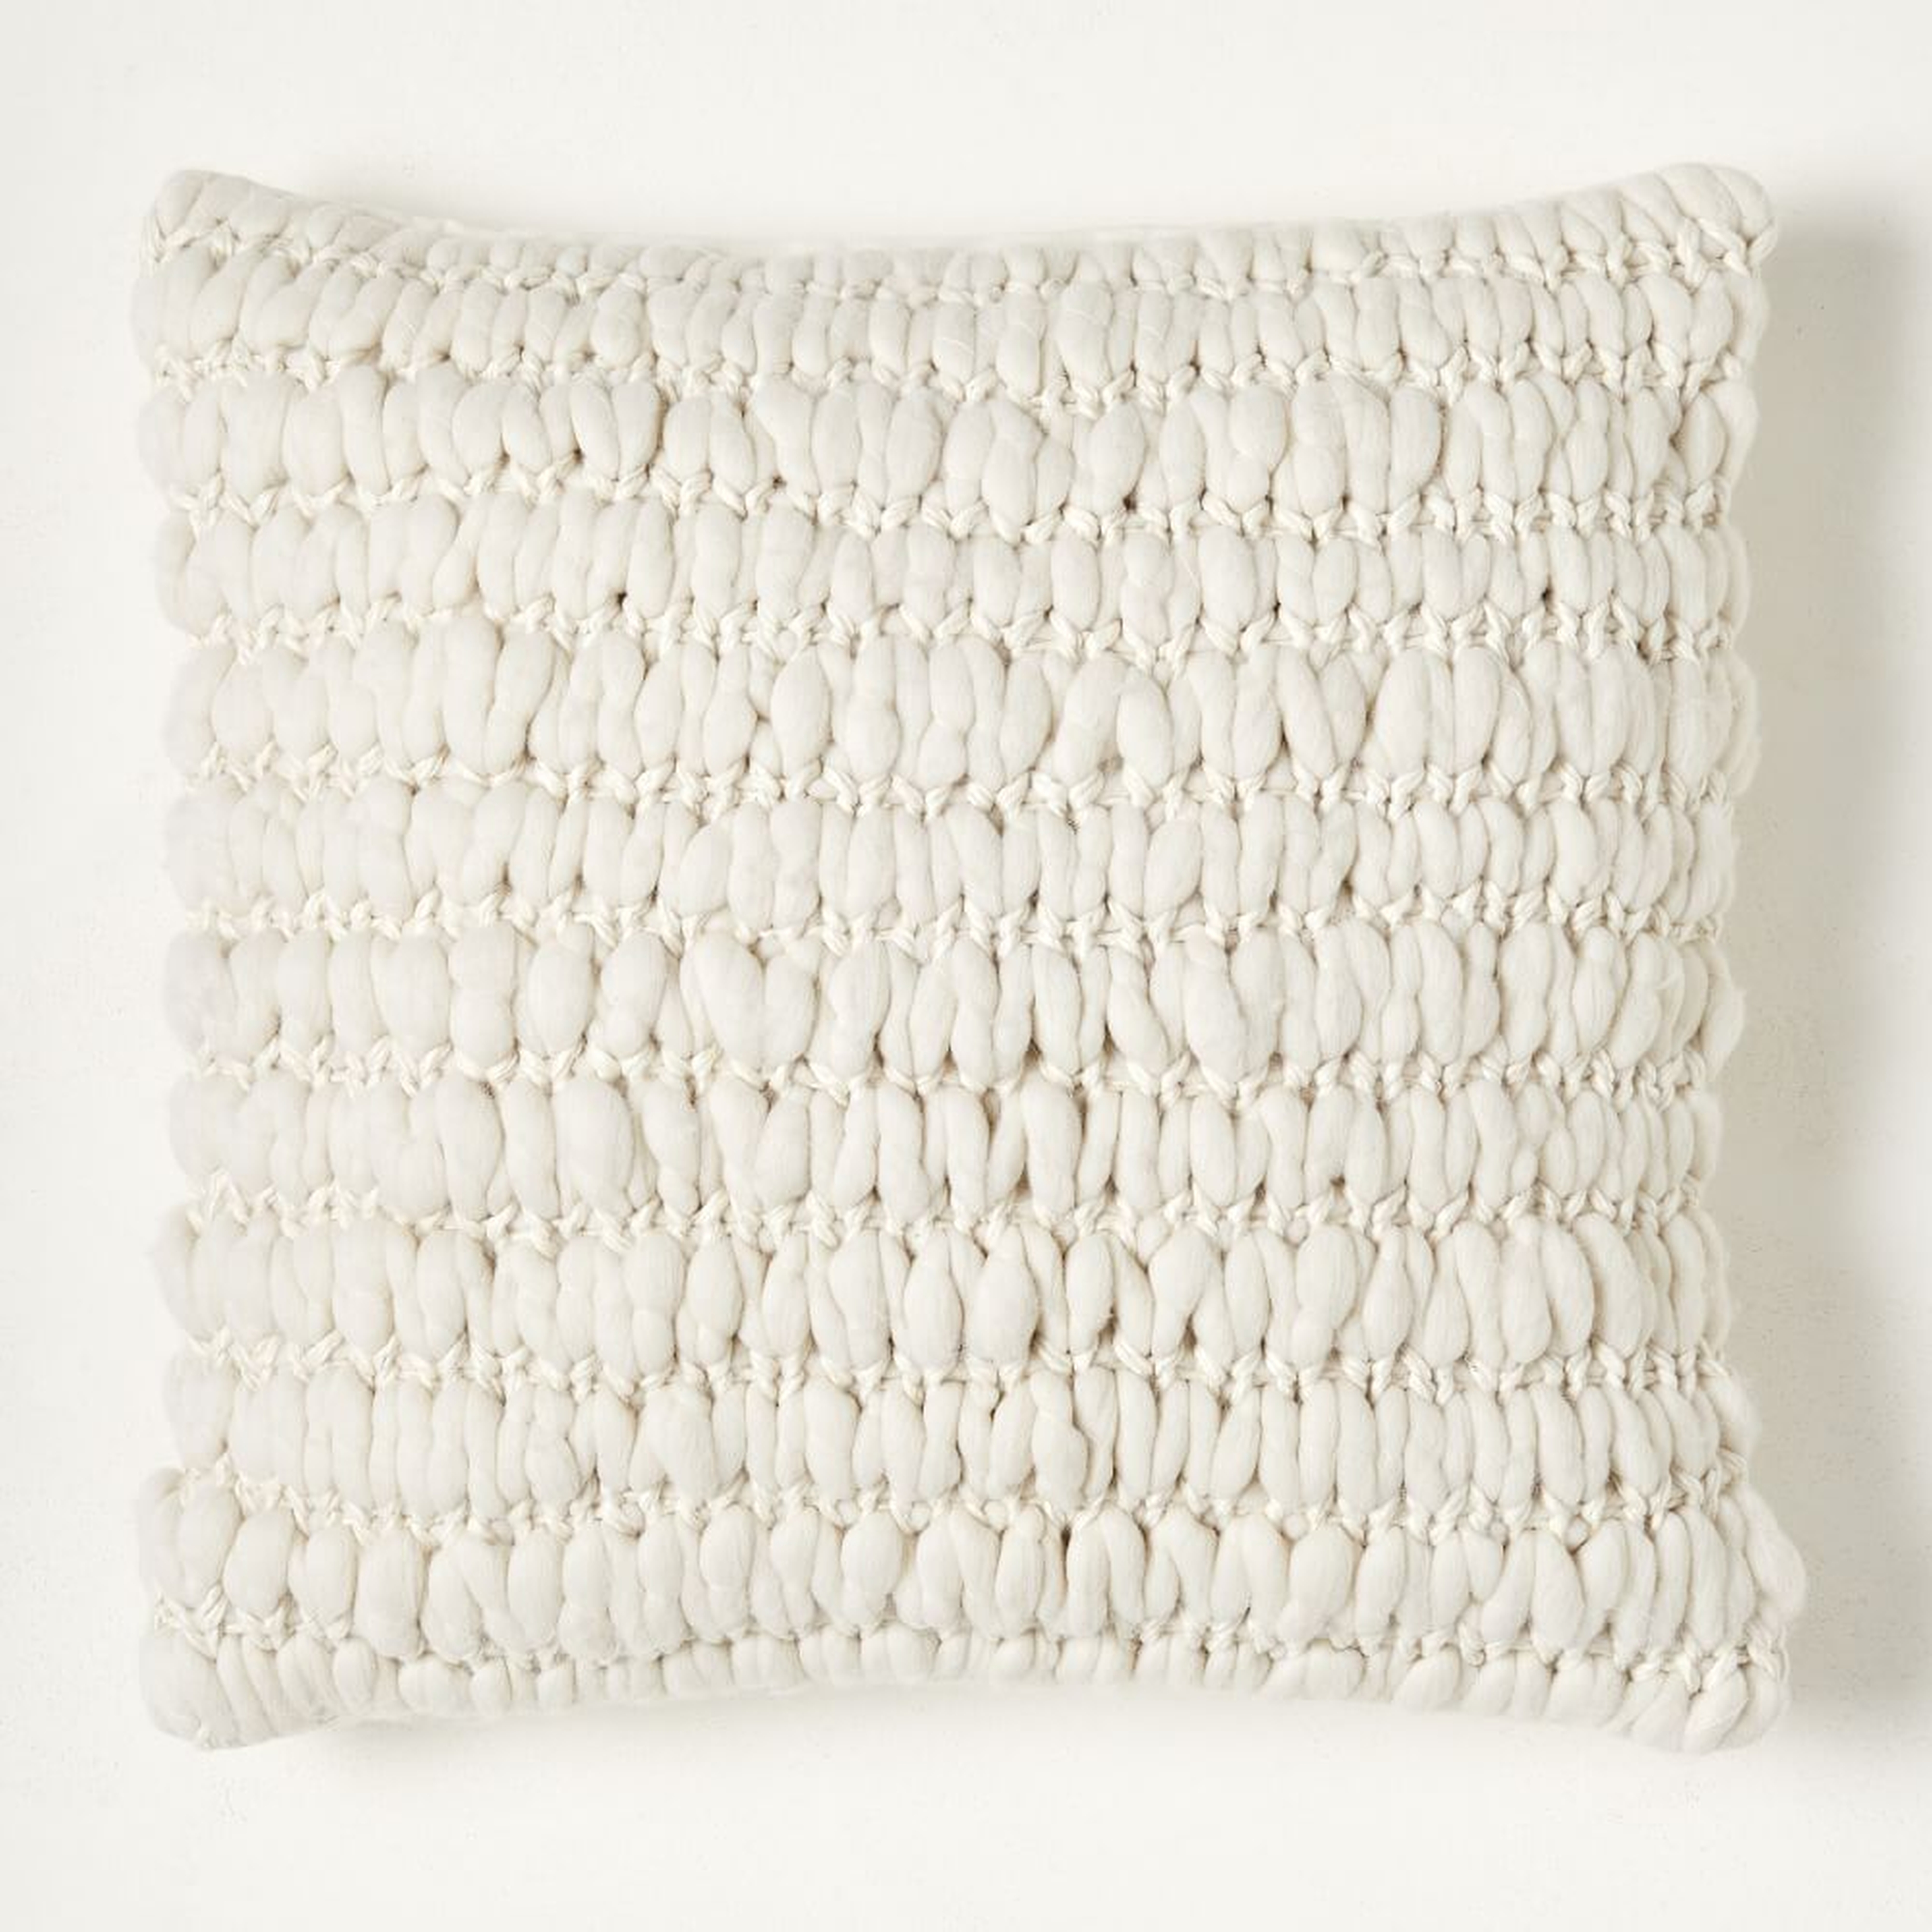 Chunky Knit Pillow Cover, 20"x20", White - West Elm